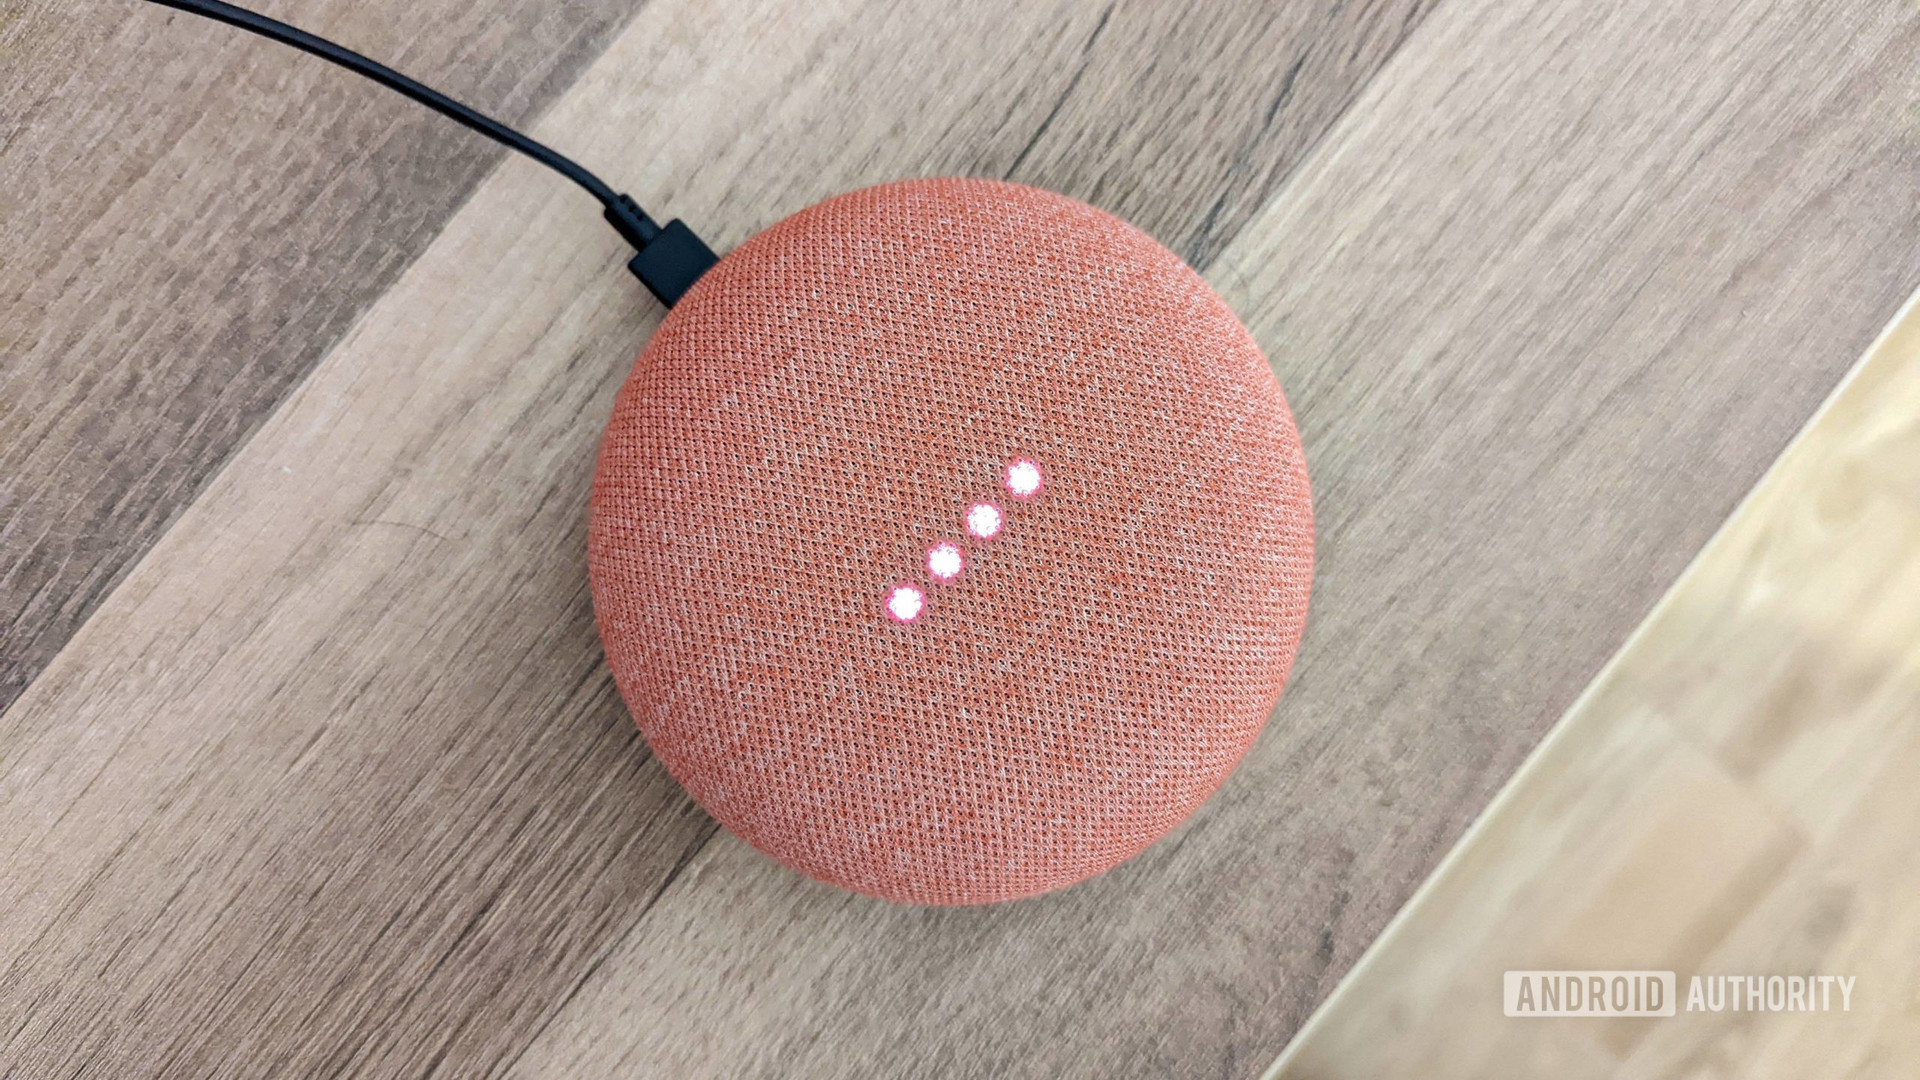 Google Home Mini in coral with lights on, on wooden background